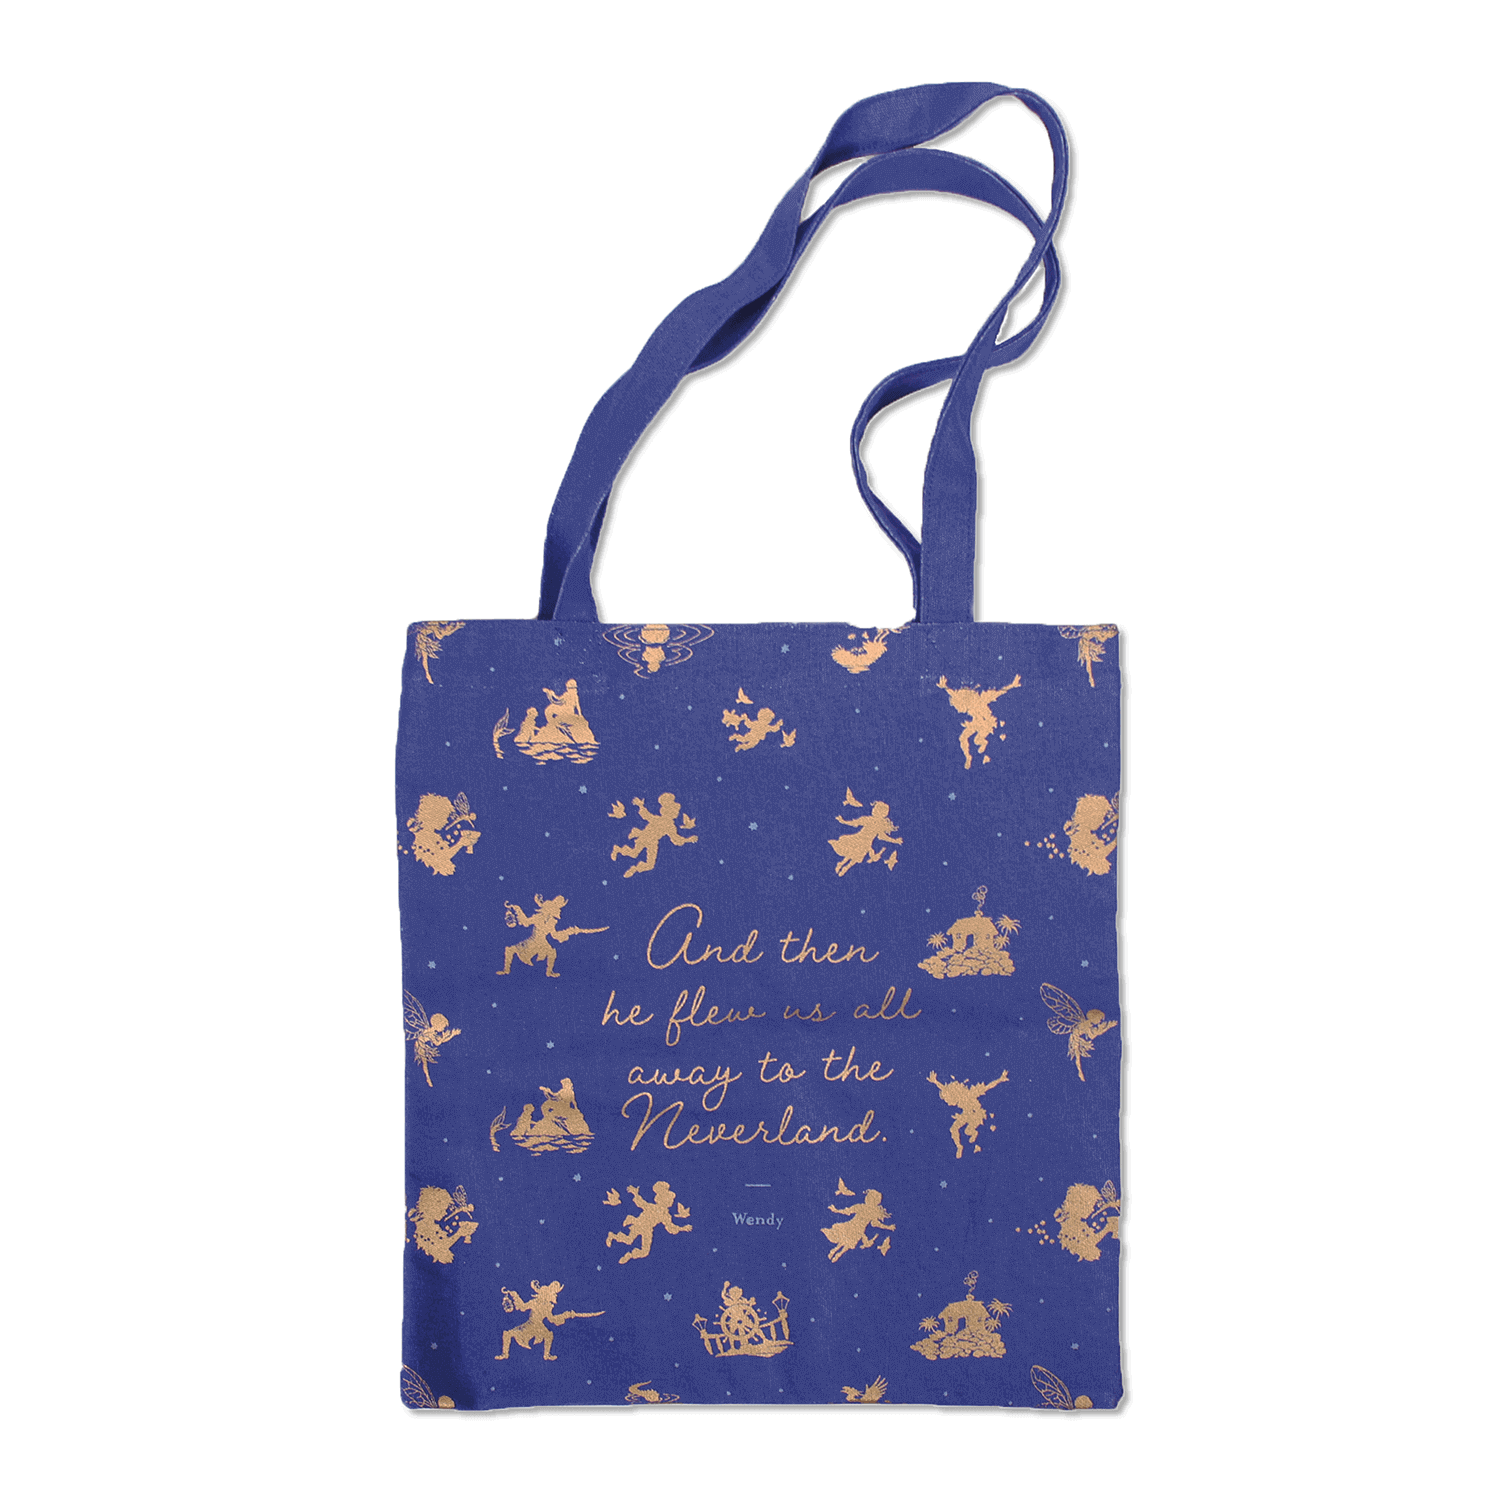 And then he flew us all away to neverland quote canvas bag